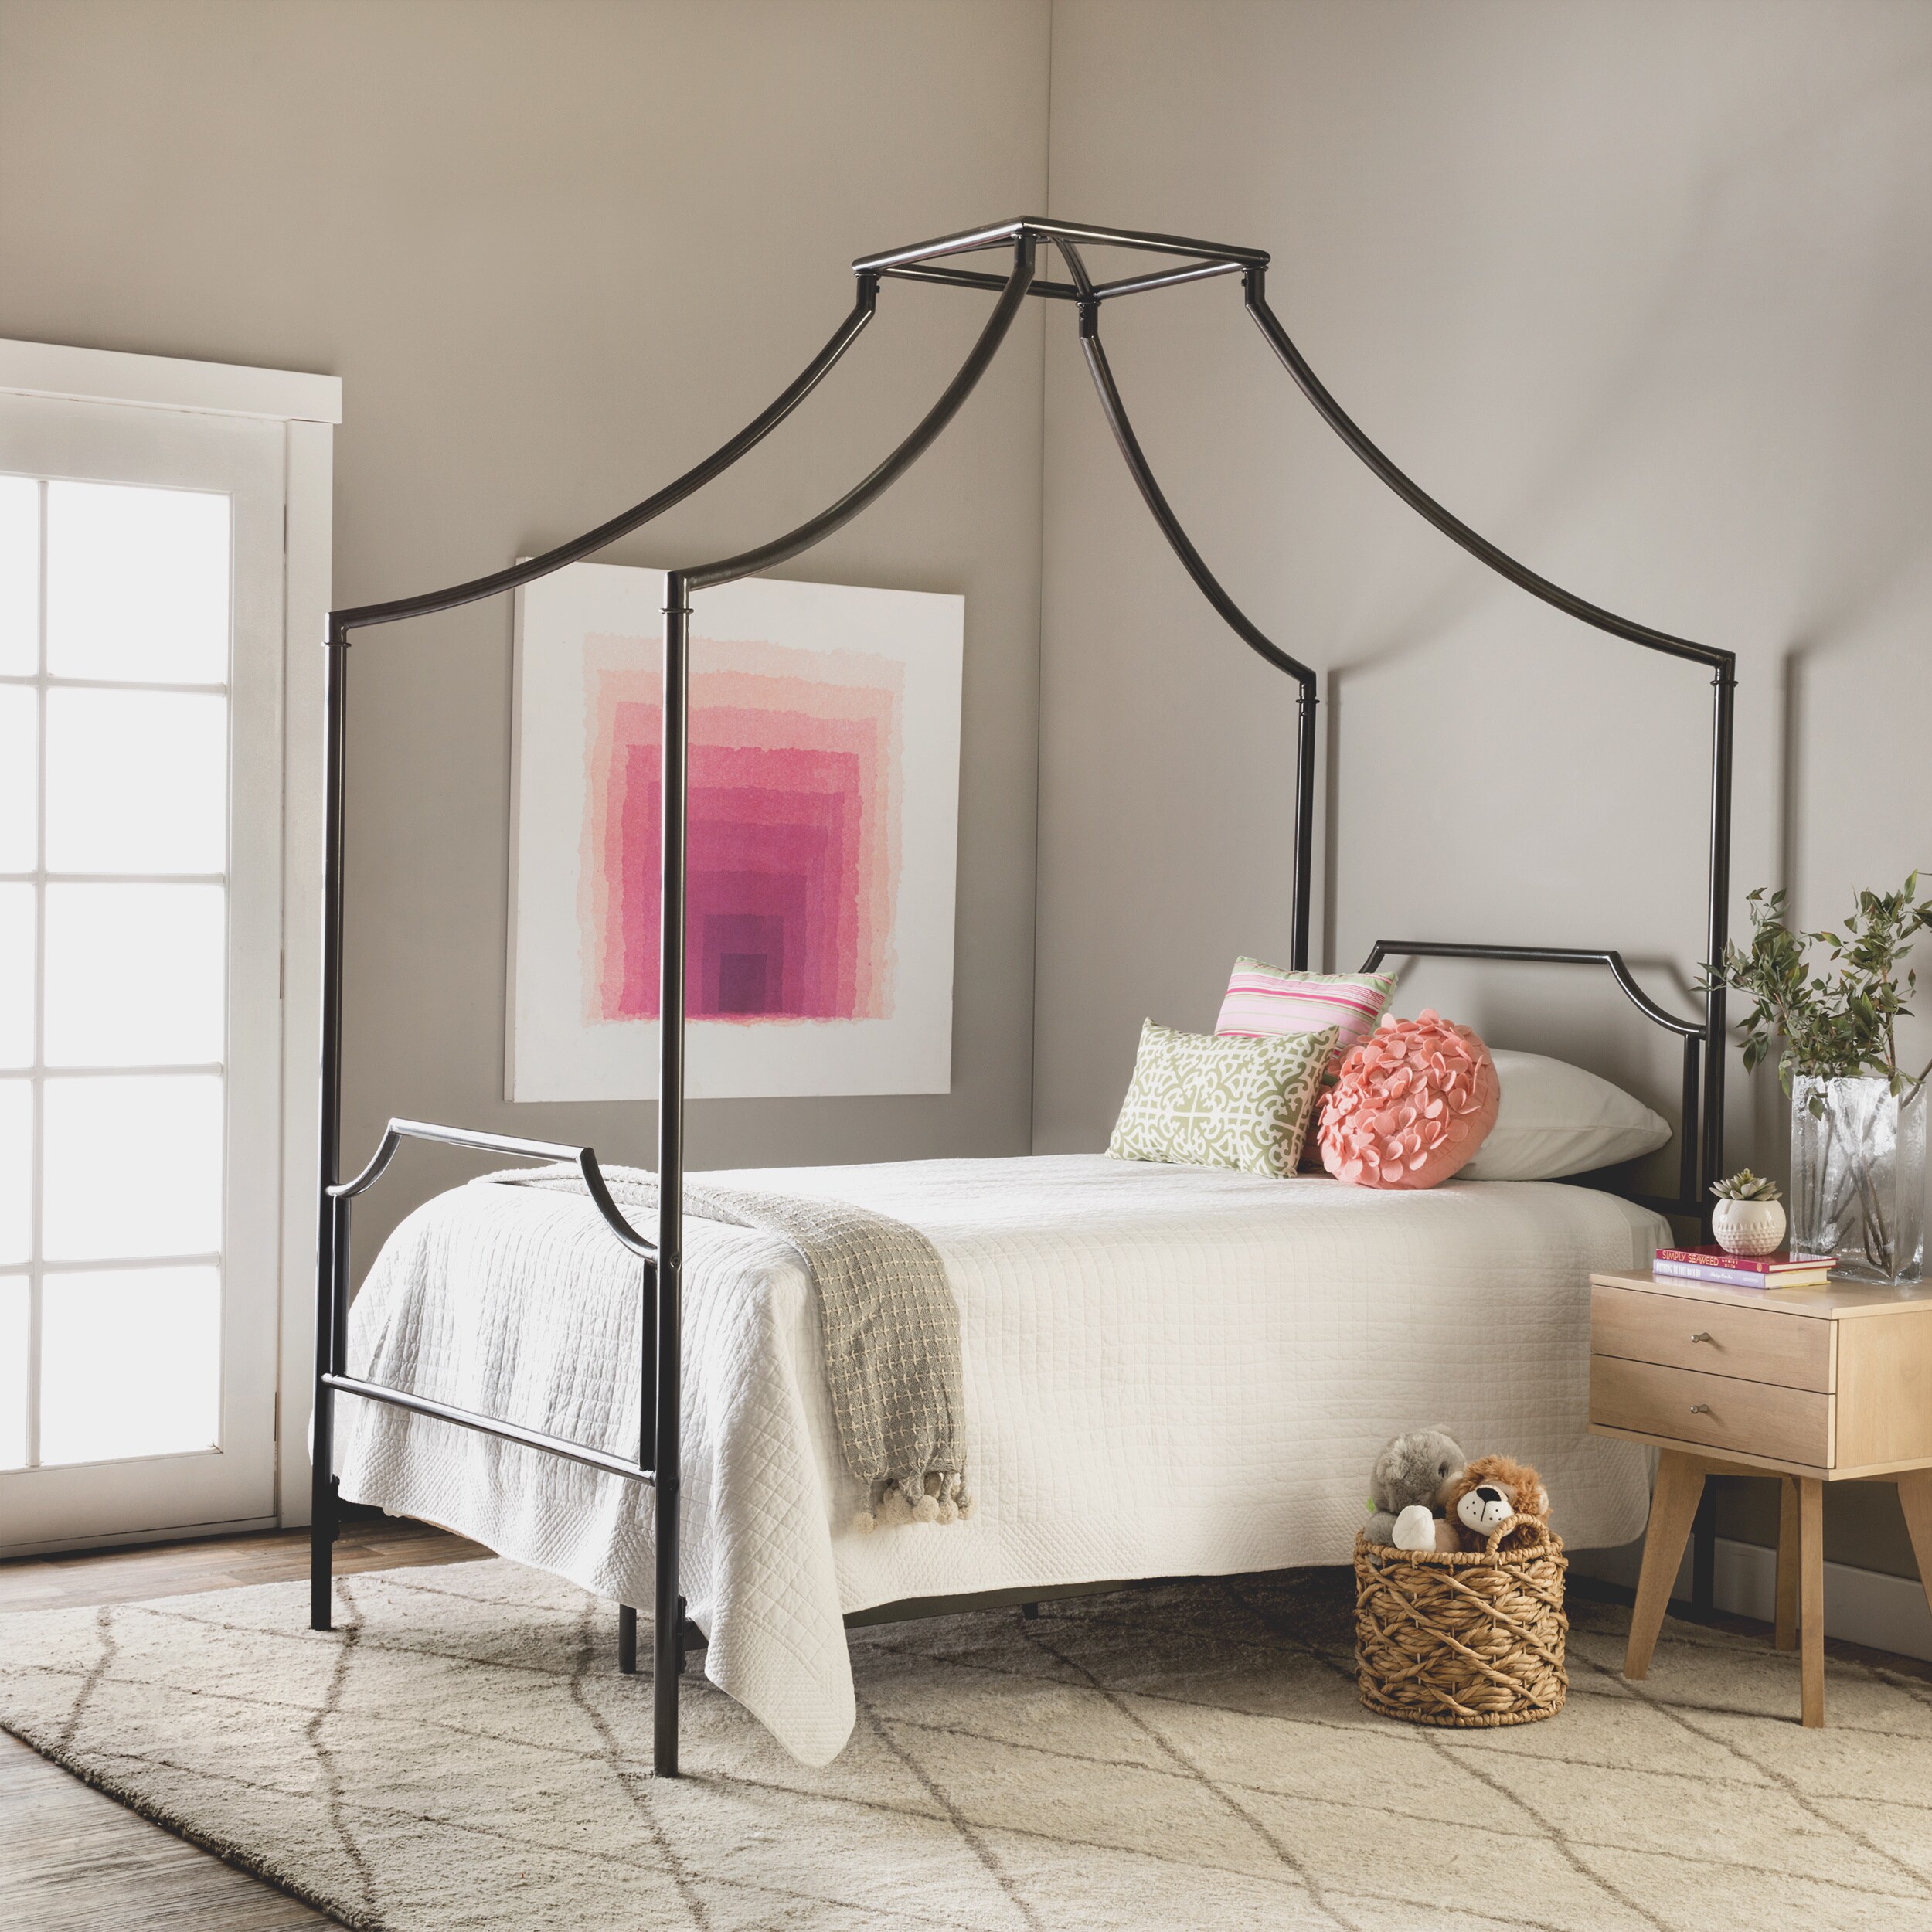 Bailey Twin Size Metal Canopy Bed